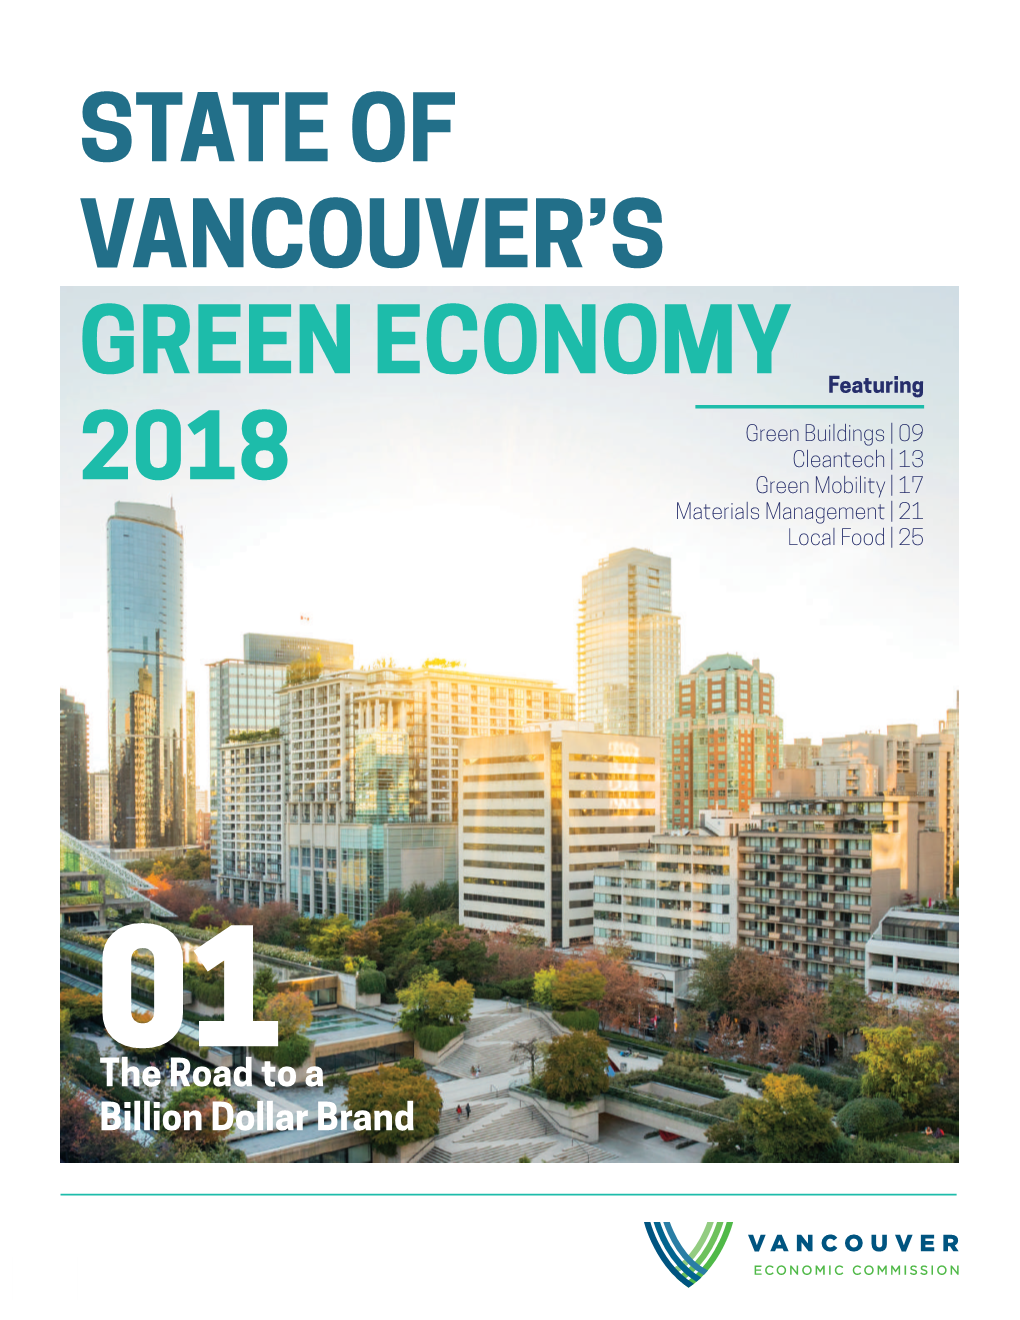 State of Vancouver's Green Economy 2018